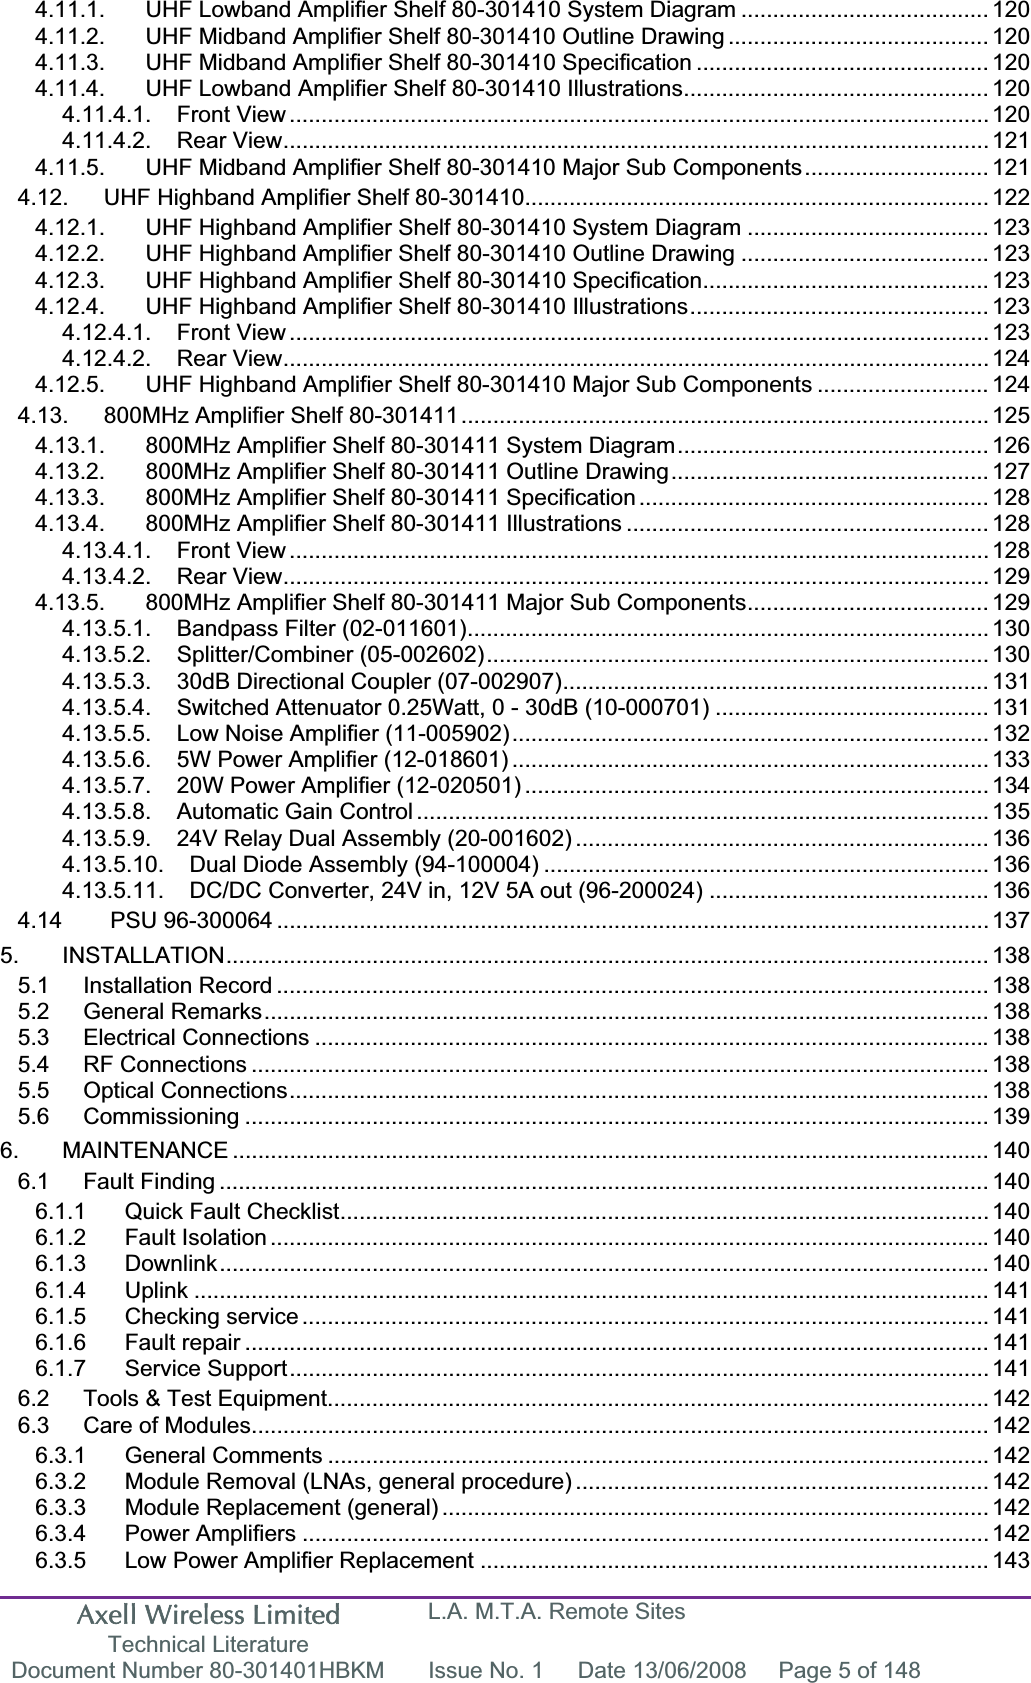 Axell Wireless Limited Technical Literature L.A. M.T.A. Remote Sites Document Number 80-301401HBKM  Issue No. 1  Date 13/06/2008  Page 5 of 148 4.11.1. UHF Lowband Amplifier Shelf 80-301410 System Diagram ....................................... 1204.11.2. UHF Midband Amplifier Shelf 80-301410 Outline Drawing ......................................... 1204.11.3. UHF Midband Amplifier Shelf 80-301410 Specification .............................................. 1204.11.4. UHF Lowband Amplifier Shelf 80-301410 Illustrations................................................ 1204.11.4.1. Front View .............................................................................................................. 1204.11.4.2. Rear View............................................................................................................... 1214.11.5. UHF Midband Amplifier Shelf 80-301410 Major Sub Components............................. 1214.12. UHF Highband Amplifier Shelf 80-301410......................................................................... 1224.12.1. UHF Highband Amplifier Shelf 80-301410 System Diagram ...................................... 1234.12.2. UHF Highband Amplifier Shelf 80-301410 Outline Drawing ....................................... 1234.12.3. UHF Highband Amplifier Shelf 80-301410 Specification............................................. 1234.12.4. UHF Highband Amplifier Shelf 80-301410 Illustrations............................................... 1234.12.4.1. Front View .............................................................................................................. 1234.12.4.2. Rear View............................................................................................................... 1244.12.5. UHF Highband Amplifier Shelf 80-301410 Major Sub Components ........................... 1244.13. 800MHz Amplifier Shelf 80-301411................................................................................... 1254.13.1. 800MHz Amplifier Shelf 80-301411 System Diagram................................................. 1264.13.2. 800MHz Amplifier Shelf 80-301411 Outline Drawing.................................................. 1274.13.3. 800MHz Amplifier Shelf 80-301411 Specification ....................................................... 1284.13.4. 800MHz Amplifier Shelf 80-301411 Illustrations ......................................................... 1284.13.4.1. Front View .............................................................................................................. 1284.13.4.2. Rear View............................................................................................................... 1294.13.5. 800MHz Amplifier Shelf 80-301411 Major Sub Components...................................... 1294.13.5.1. Bandpass Filter (02-011601)..................................................................................1304.13.5.2. Splitter/Combiner (05-002602)............................................................................... 1304.13.5.3. 30dB Directional Coupler (07-002907)................................................................... 1314.13.5.4. Switched Attenuator 0.25Watt, 0 - 30dB (10-000701) ........................................... 1314.13.5.5. Low Noise Amplifier (11-005902)........................................................................... 1324.13.5.6. 5W Power Amplifier (12-018601) ........................................................................... 1334.13.5.7. 20W Power Amplifier (12-020501) ......................................................................... 1344.13.5.8. Automatic Gain Control .......................................................................................... 1354.13.5.9. 24V Relay Dual Assembly (20-001602) ................................................................. 1364.13.5.10. Dual Diode Assembly (94-100004) ...................................................................... 1364.13.5.11. DC/DC Converter, 24V in, 12V 5A out (96-200024) ............................................ 1364.14  PSU 96-300064 ................................................................................................................ 1375. INSTALLATION........................................................................................................................ 1385.1 Installation Record ................................................................................................................ 1385.2 General Remarks.................................................................................................................. 1385.3 Electrical Connections .......................................................................................................... 1385.4 RF Connections .................................................................................................................... 1385.5 Optical Connections.............................................................................................................. 1385.6 Commissioning ..................................................................................................................... 1396. MAINTENANCE ....................................................................................................................... 1406.1 Fault Finding ......................................................................................................................... 1406.1.1 Quick Fault Checklist...................................................................................................... 1406.1.2 Fault Isolation ................................................................................................................. 1406.1.3 Downlink......................................................................................................................... 1406.1.4 Uplink ............................................................................................................................. 1416.1.5 Checking service ............................................................................................................ 1416.1.6 Fault repair ..................................................................................................................... 1416.1.7 Service Support.............................................................................................................. 1416.2 Tools &amp; Test Equipment........................................................................................................ 1426.3 Care of Modules.................................................................................................................... 1426.3.1 General Comments ........................................................................................................ 1426.3.2 Module Removal (LNAs, general procedure) ................................................................. 1426.3.3 Module Replacement (general) ...................................................................................... 1426.3.4 Power Amplifiers ............................................................................................................ 1426.3.5 Low Power Amplifier Replacement ................................................................................ 143